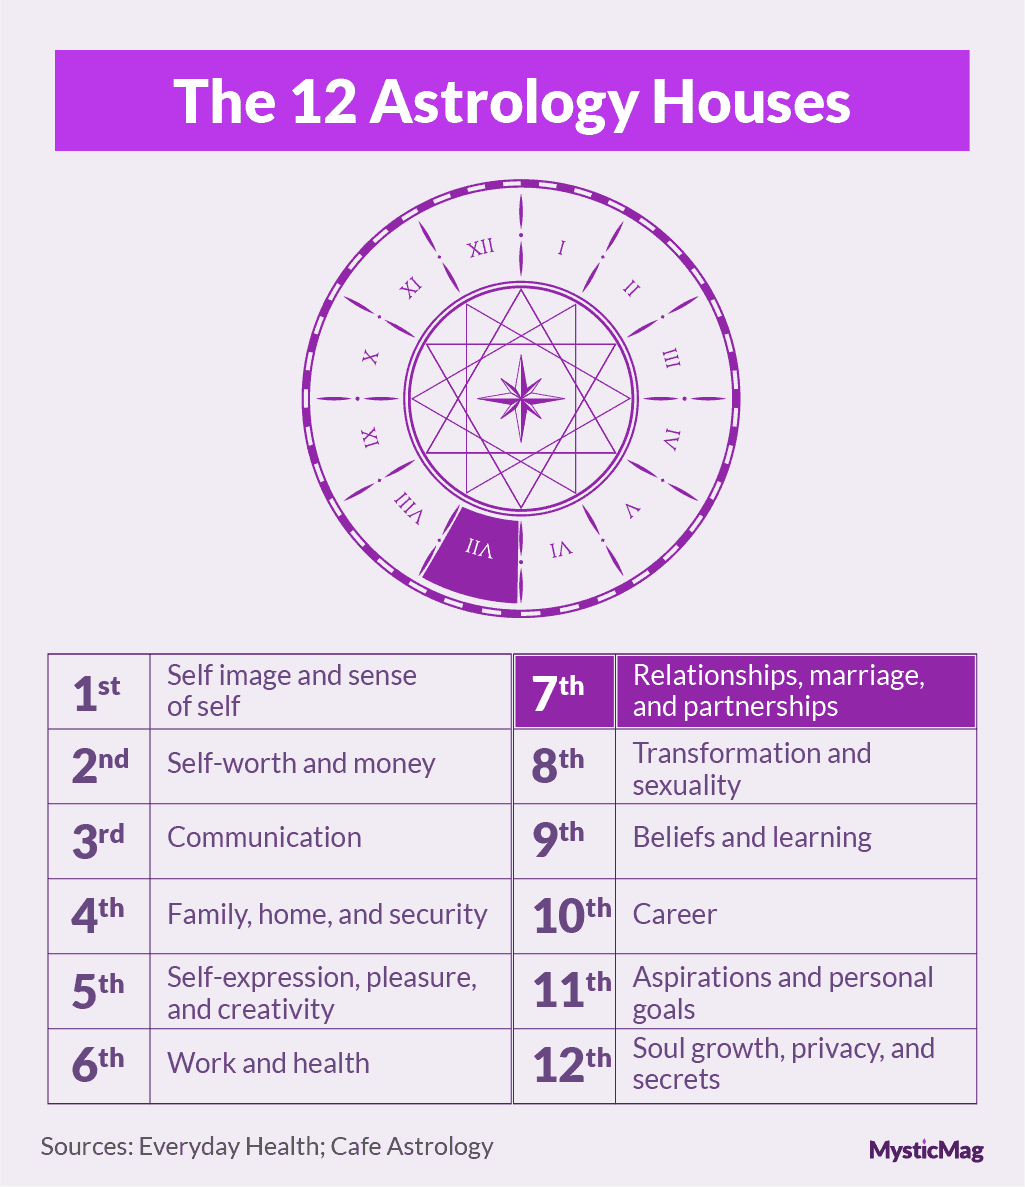 The astrology houses